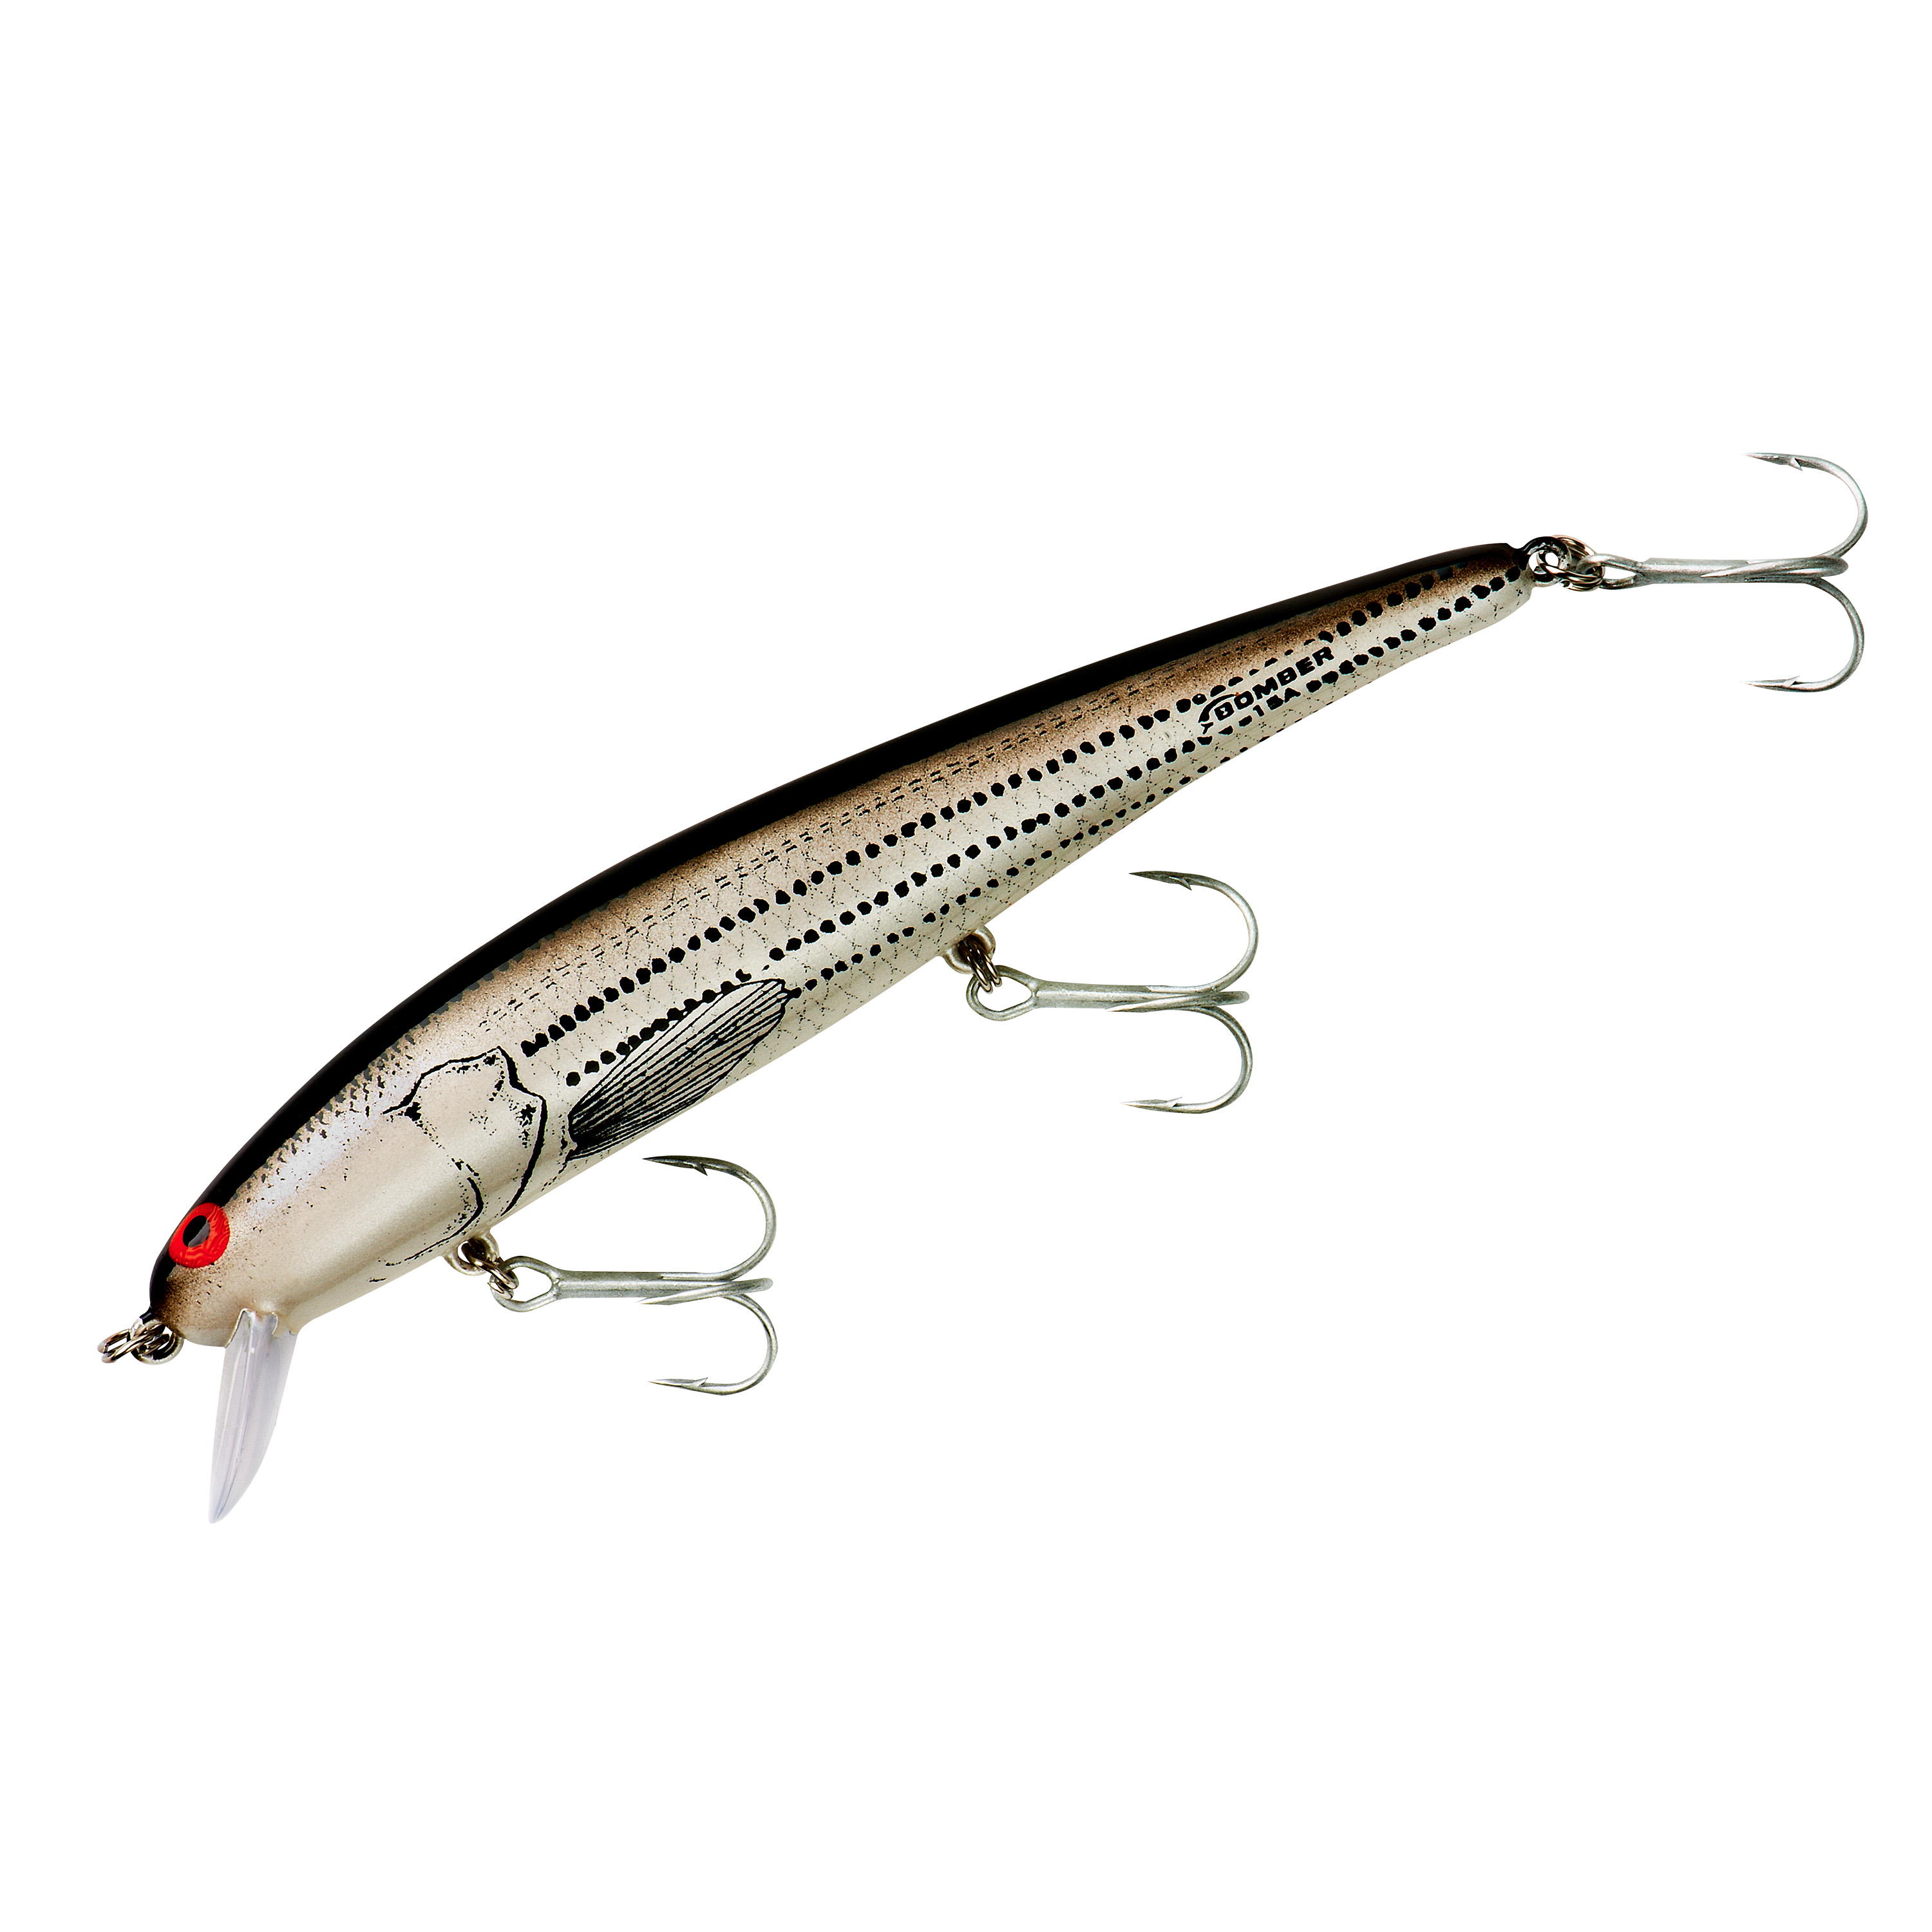 Bomber Model Long a 14a Crankbait B14AXSI Silver Flash Black Back Fishing  Lure for sale online